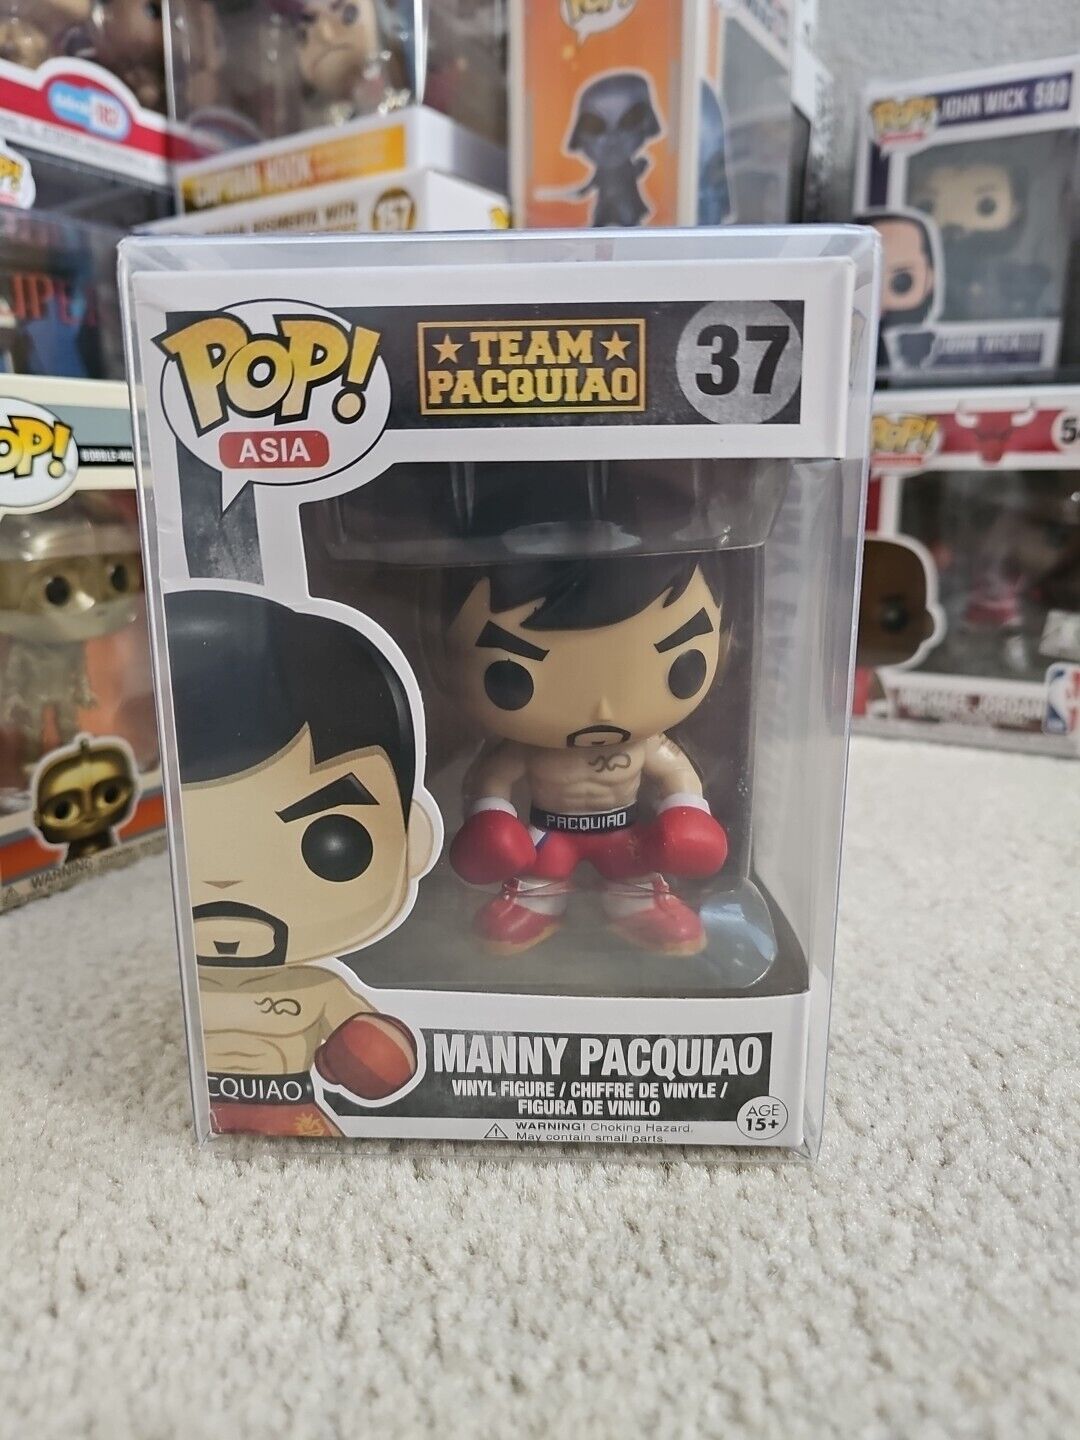 New Funko Pop Asia Team Pacquiao #37 Manny Pacquiao Vinyl Figure With Case